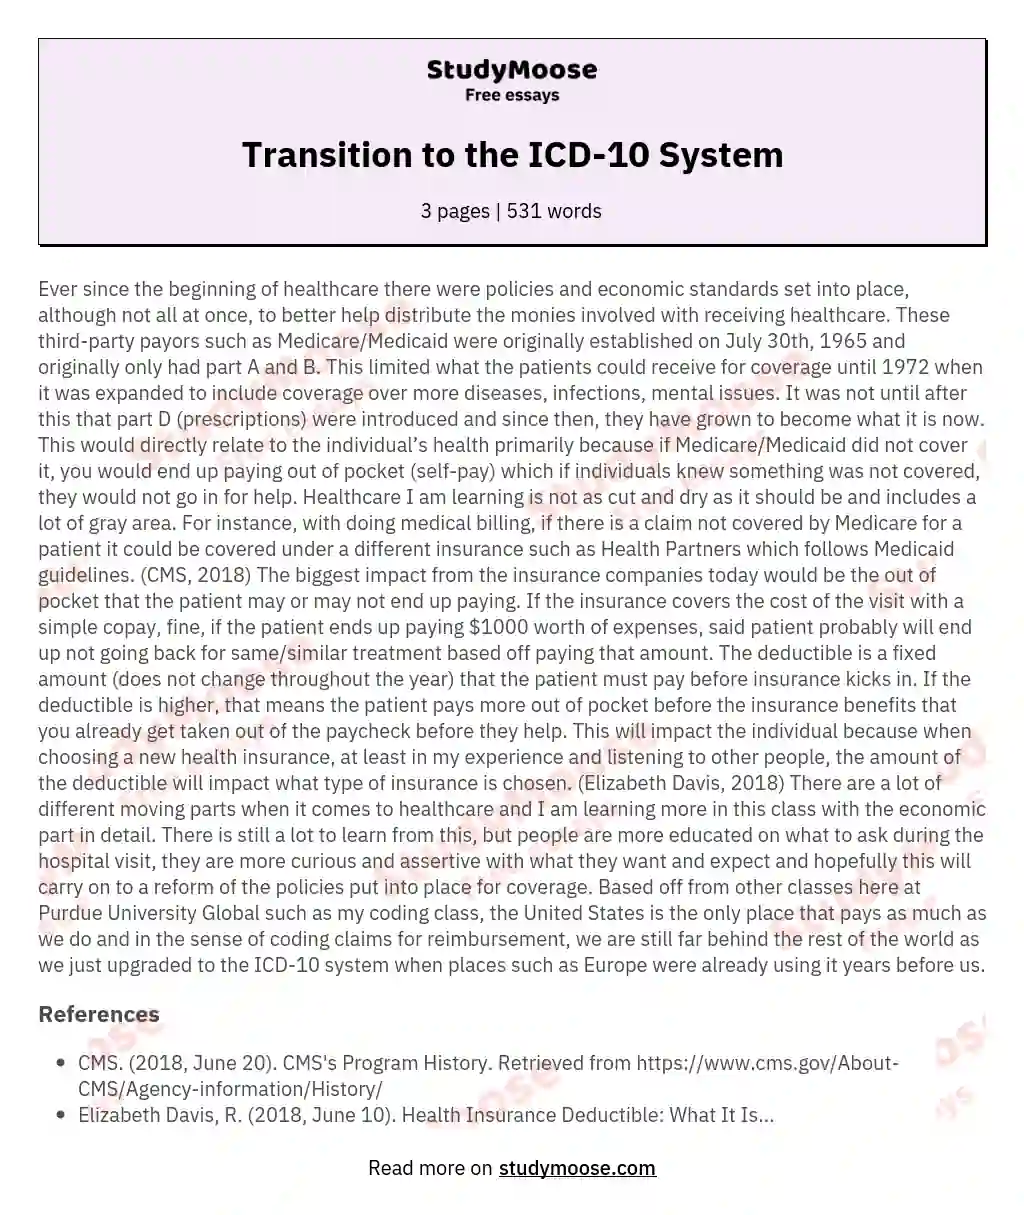 Transition to the ICD-10 System essay